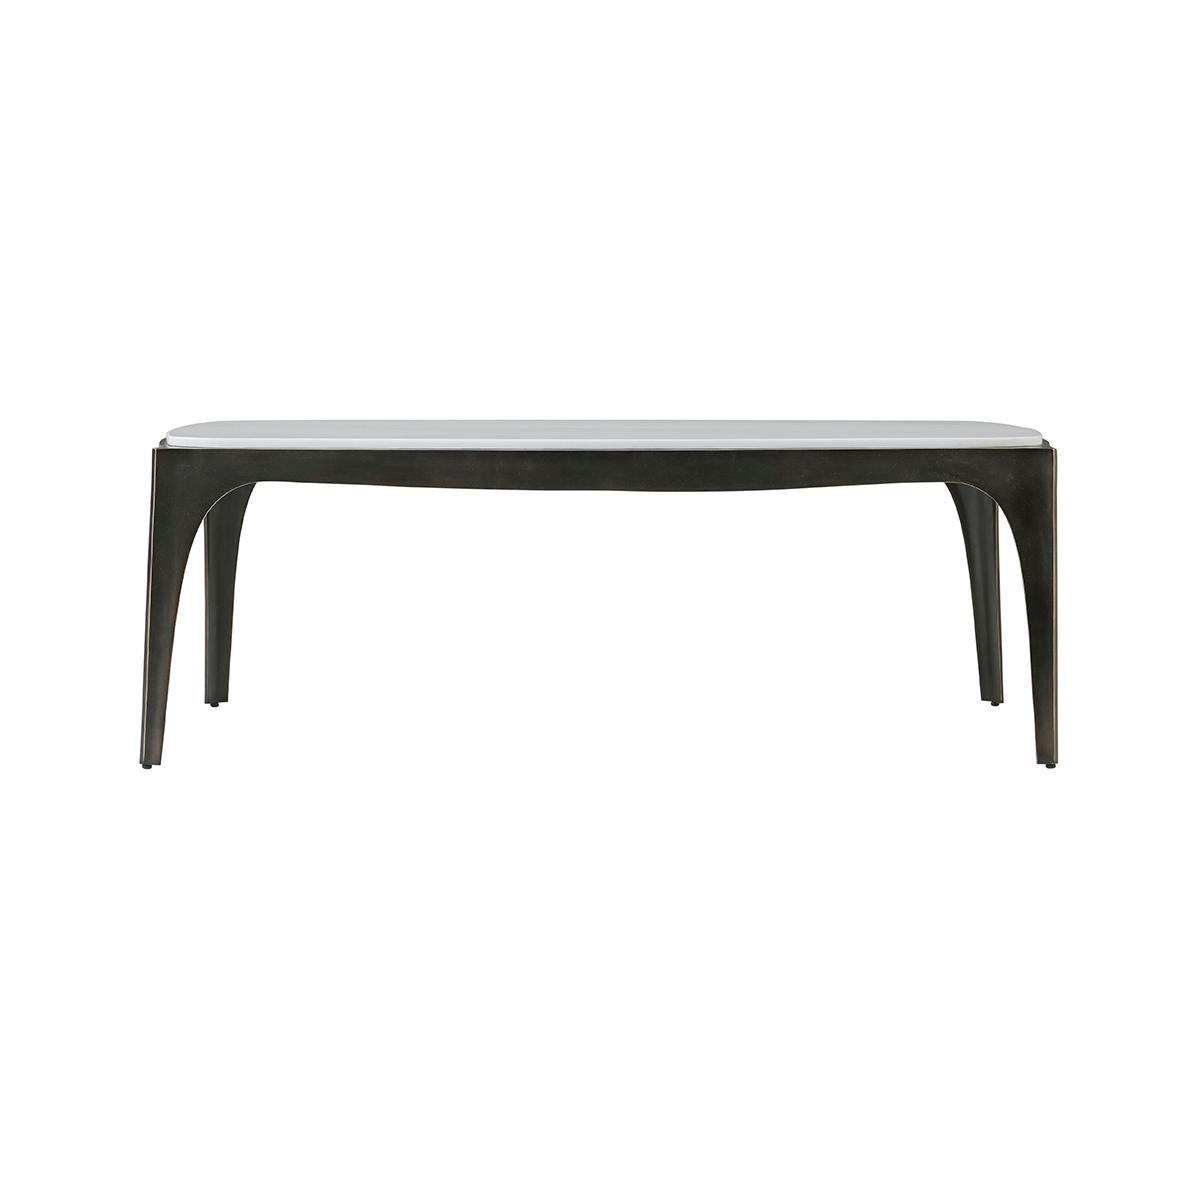 The raised marble top is set upon a shaped base with four organic sculptural legs, elegantly featured in a dark finished metal.

Dimensions: 49.25